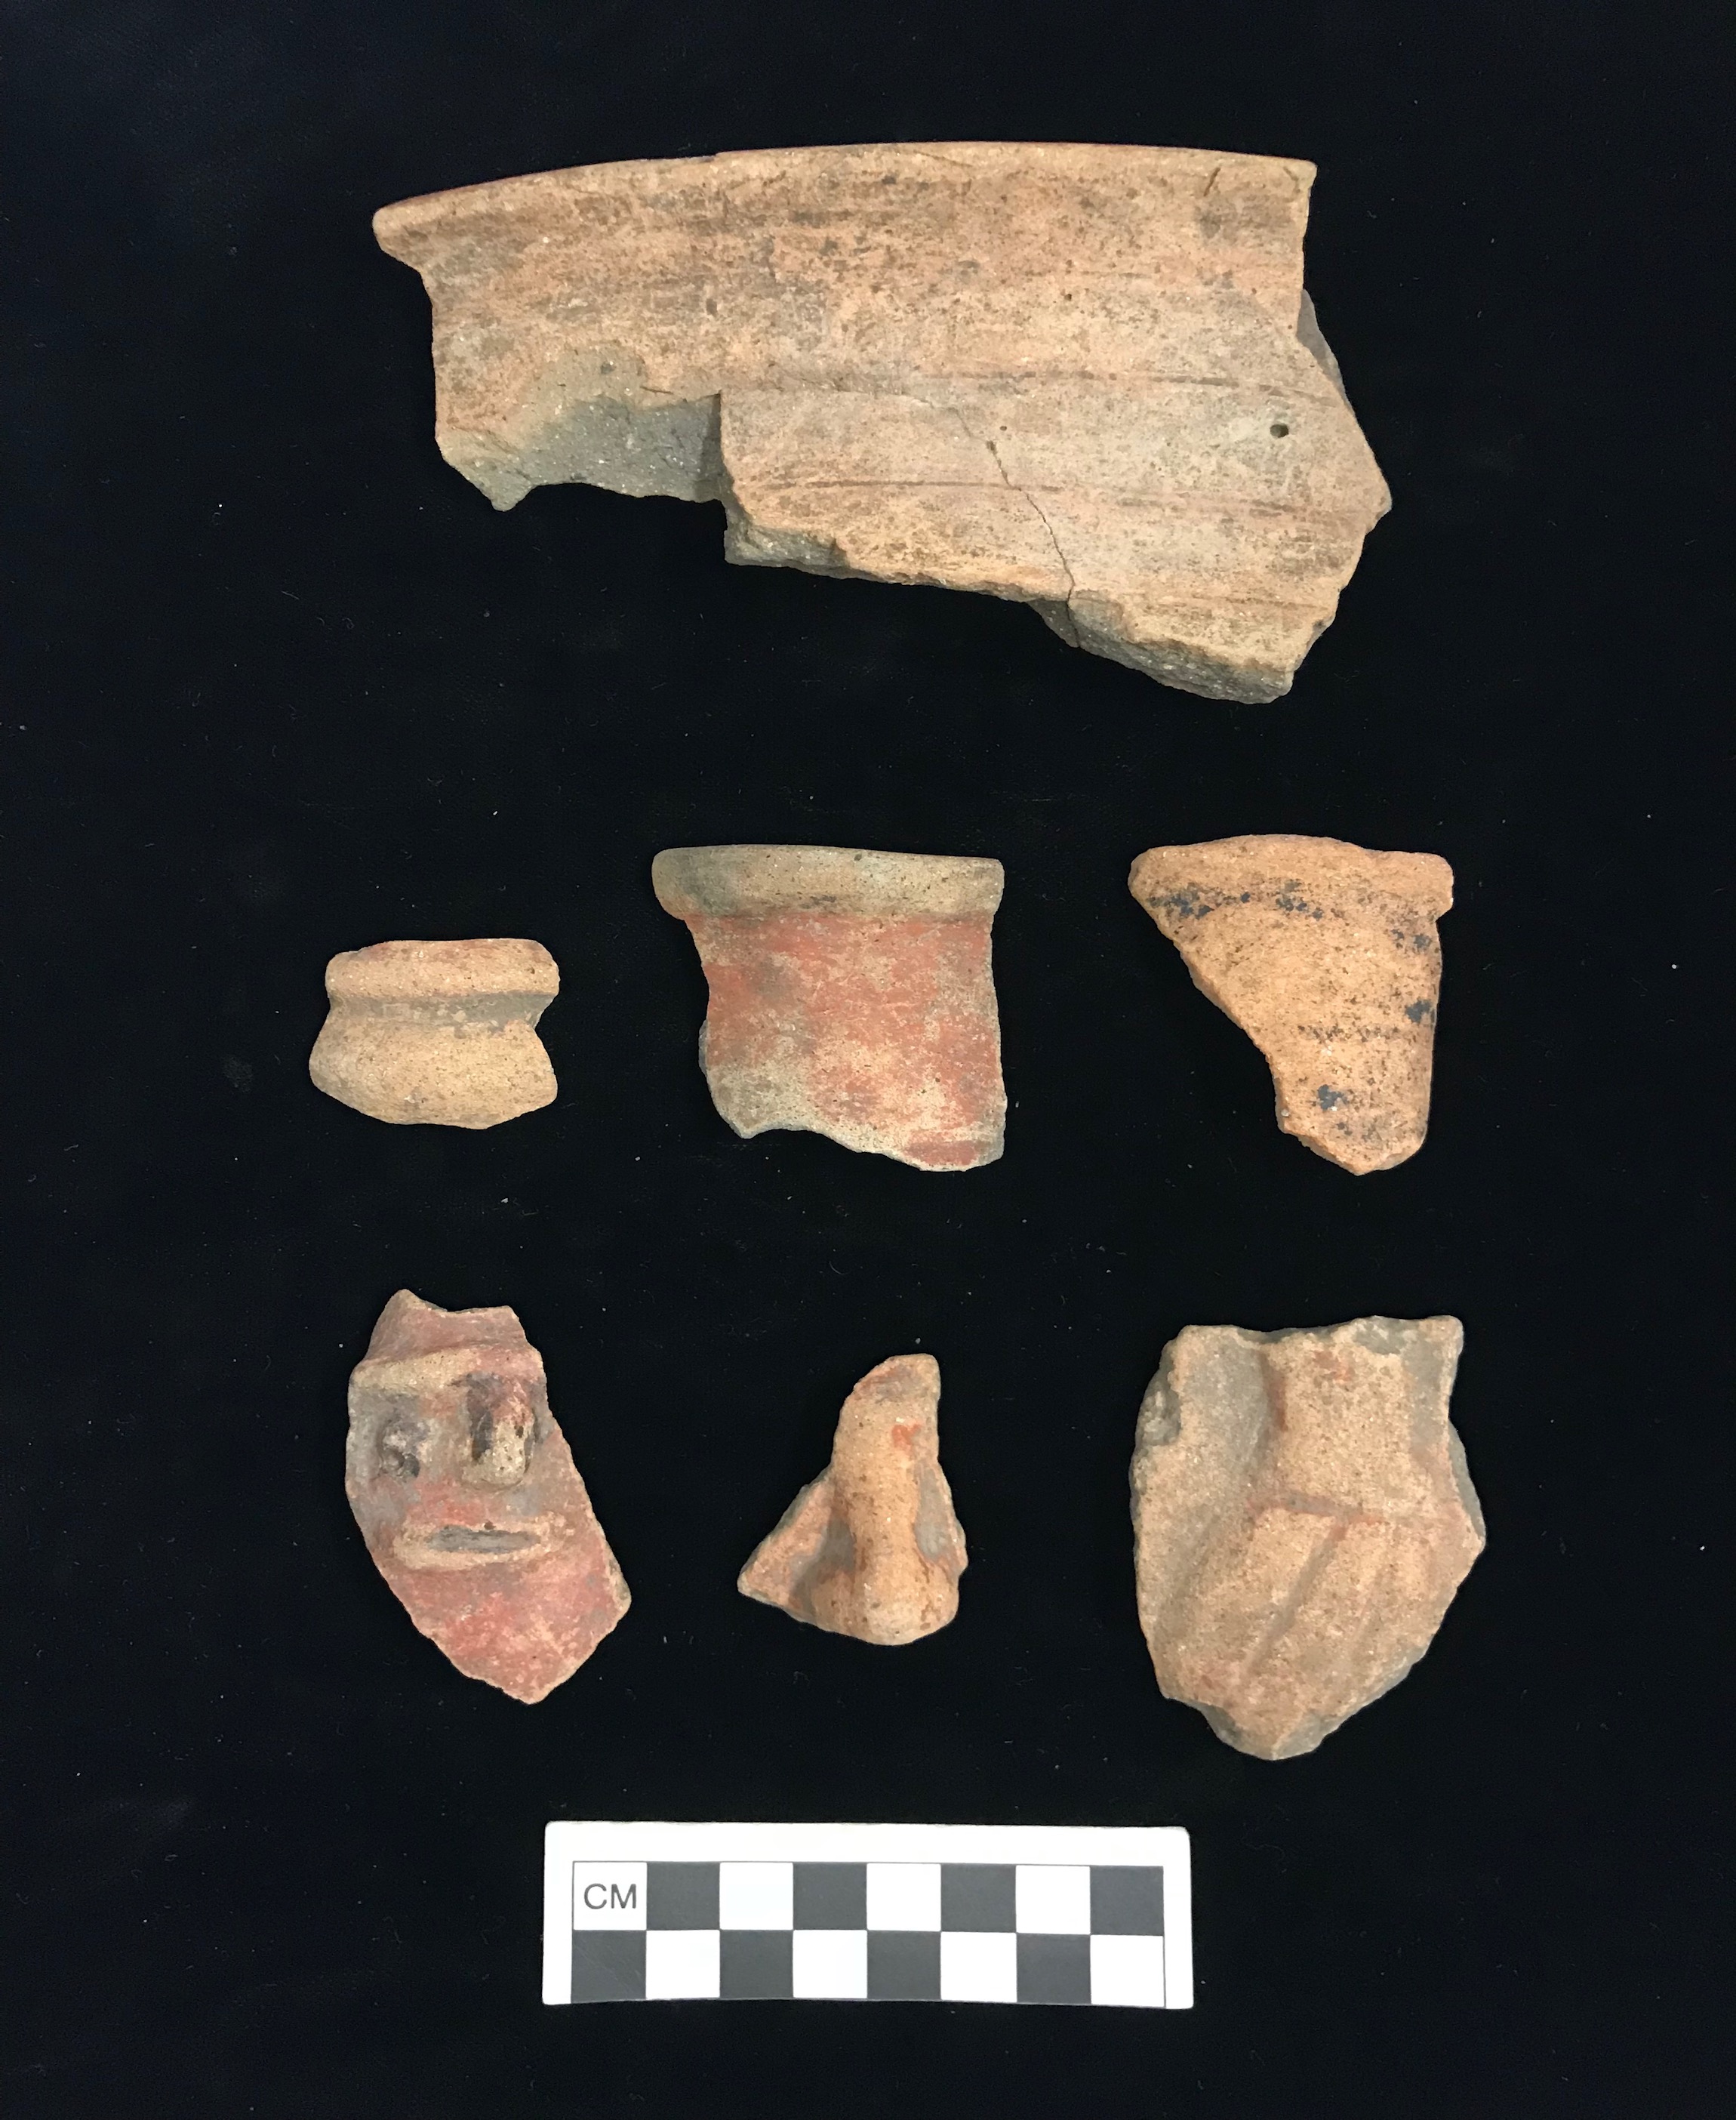 Plate XIII. SIMON NECK DECORATED AND PEARLS WATER BOTTLE SHERDS. FLMNH Acc. Nos. 98002, 97990, 97994, 97995, and 97996.